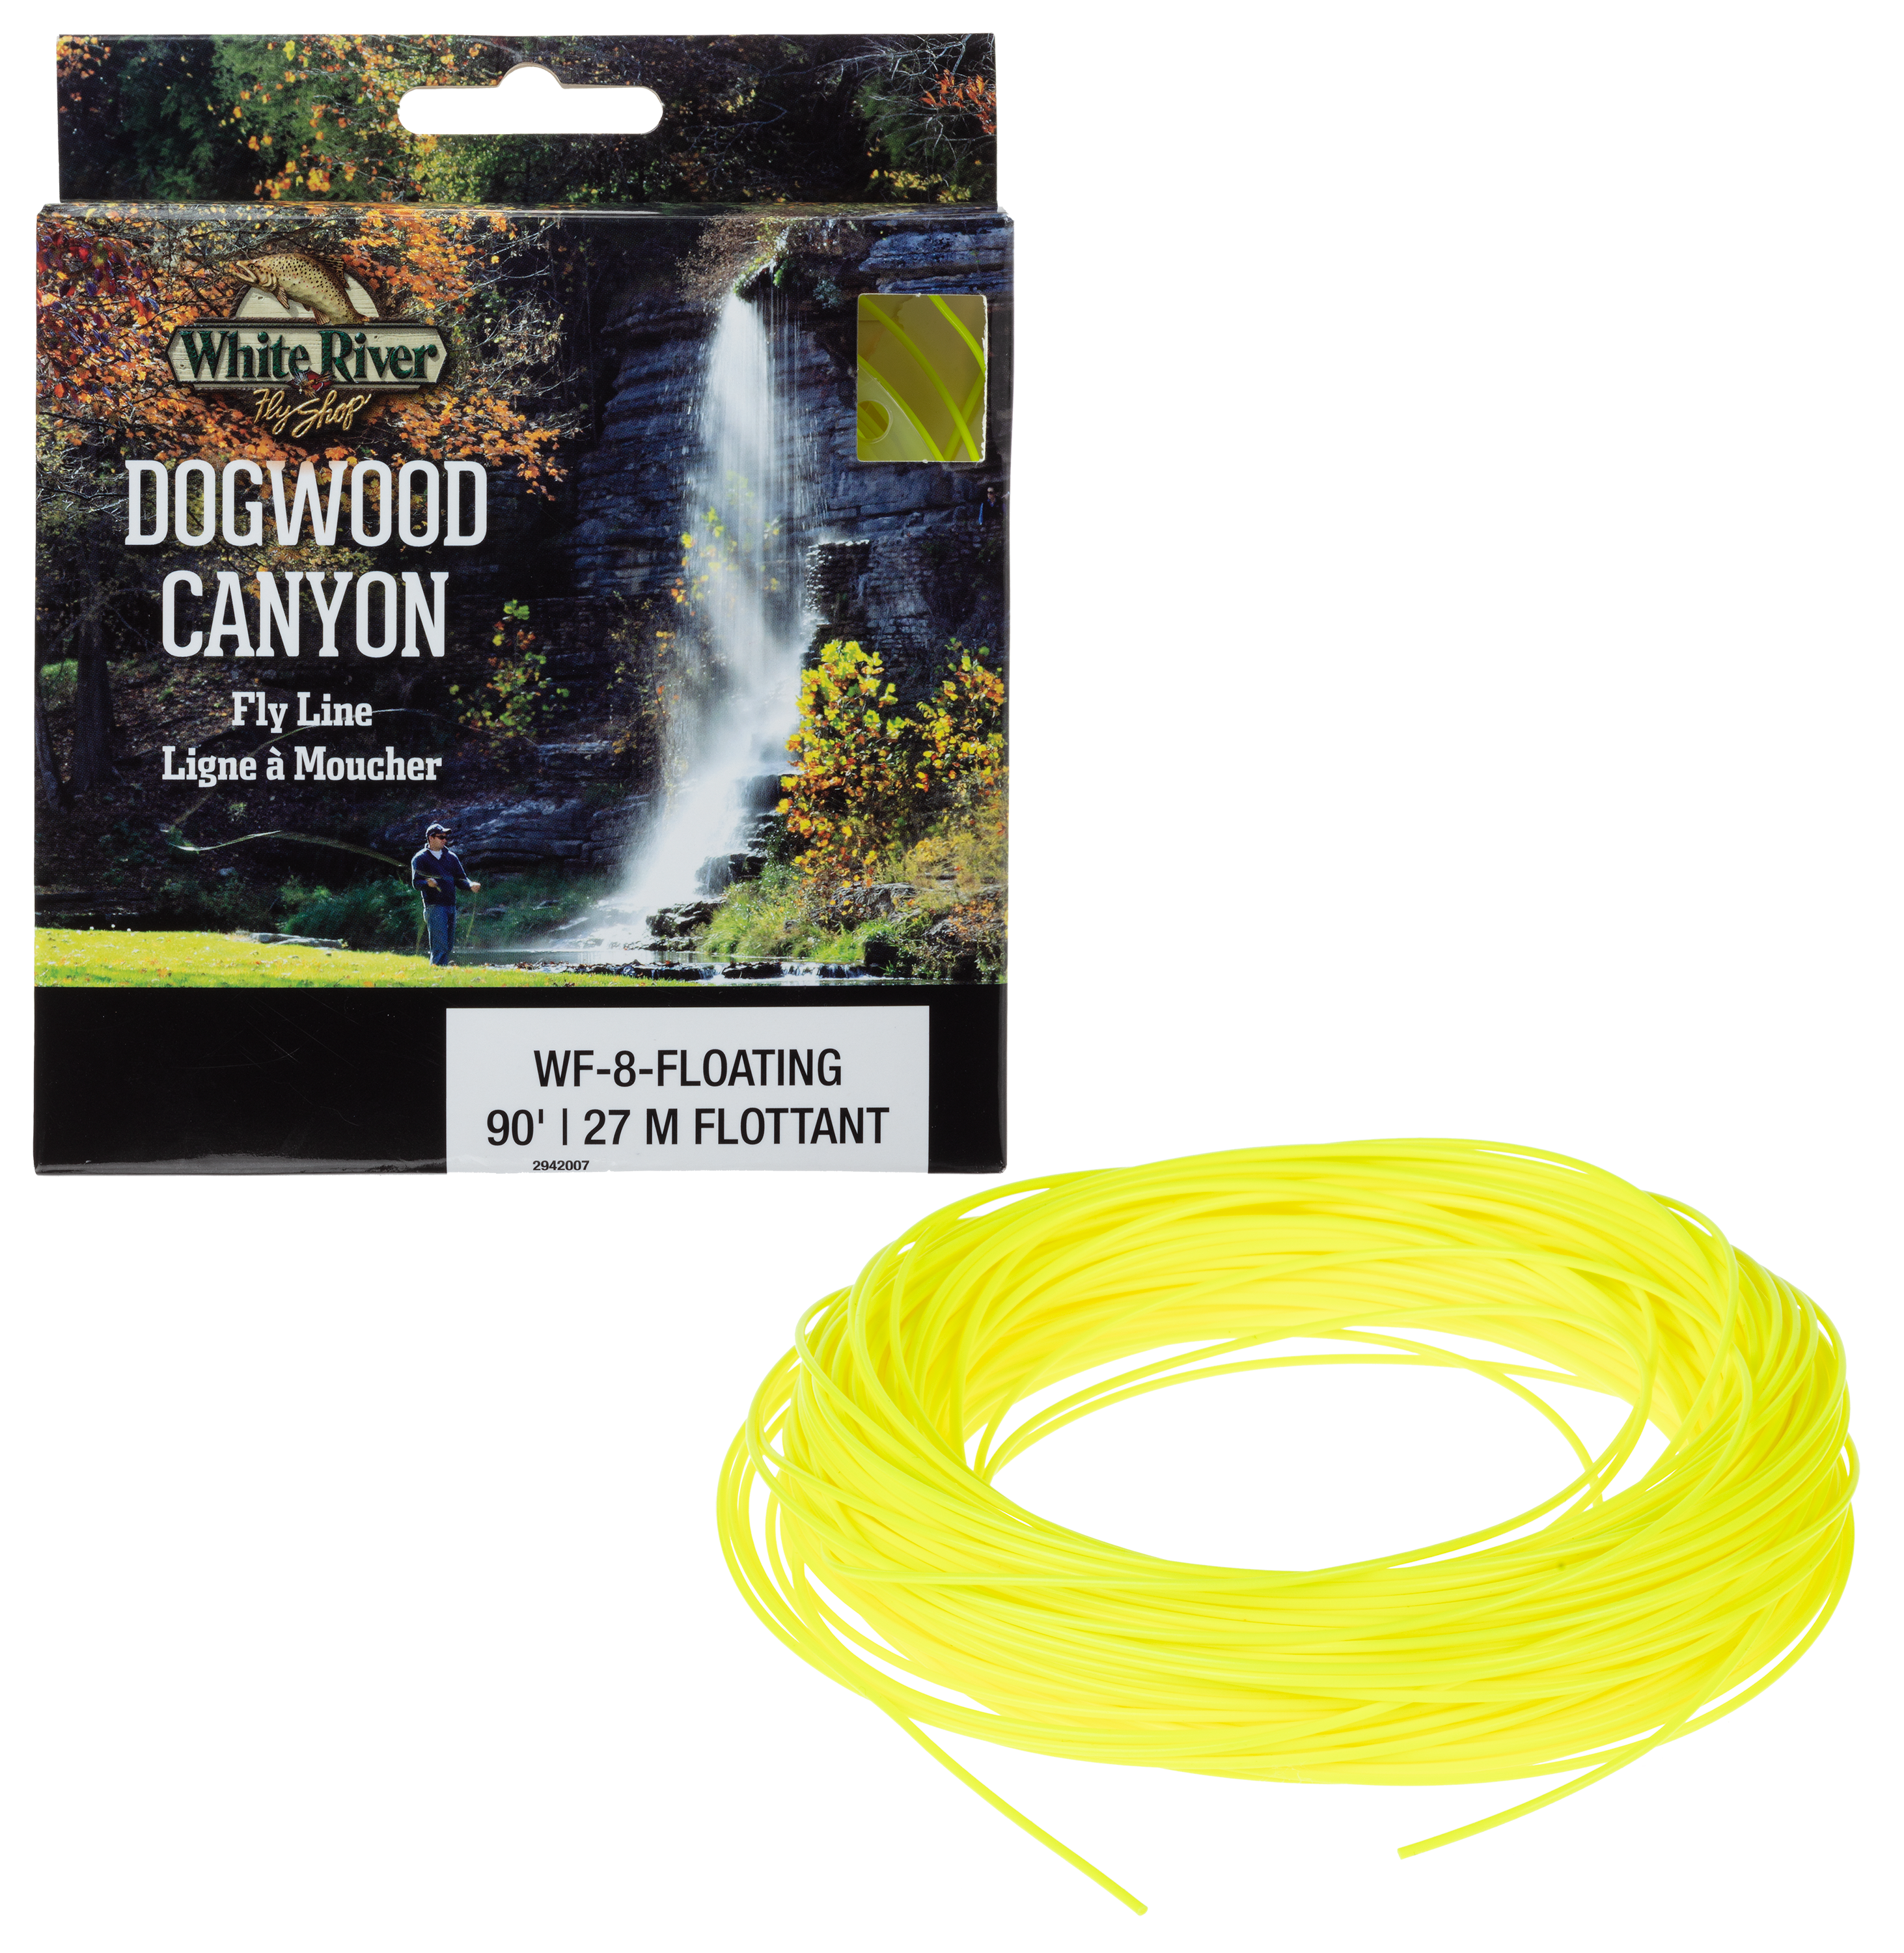 White River Fly Shop Dogwood Canyon Floating Fly Line - 8